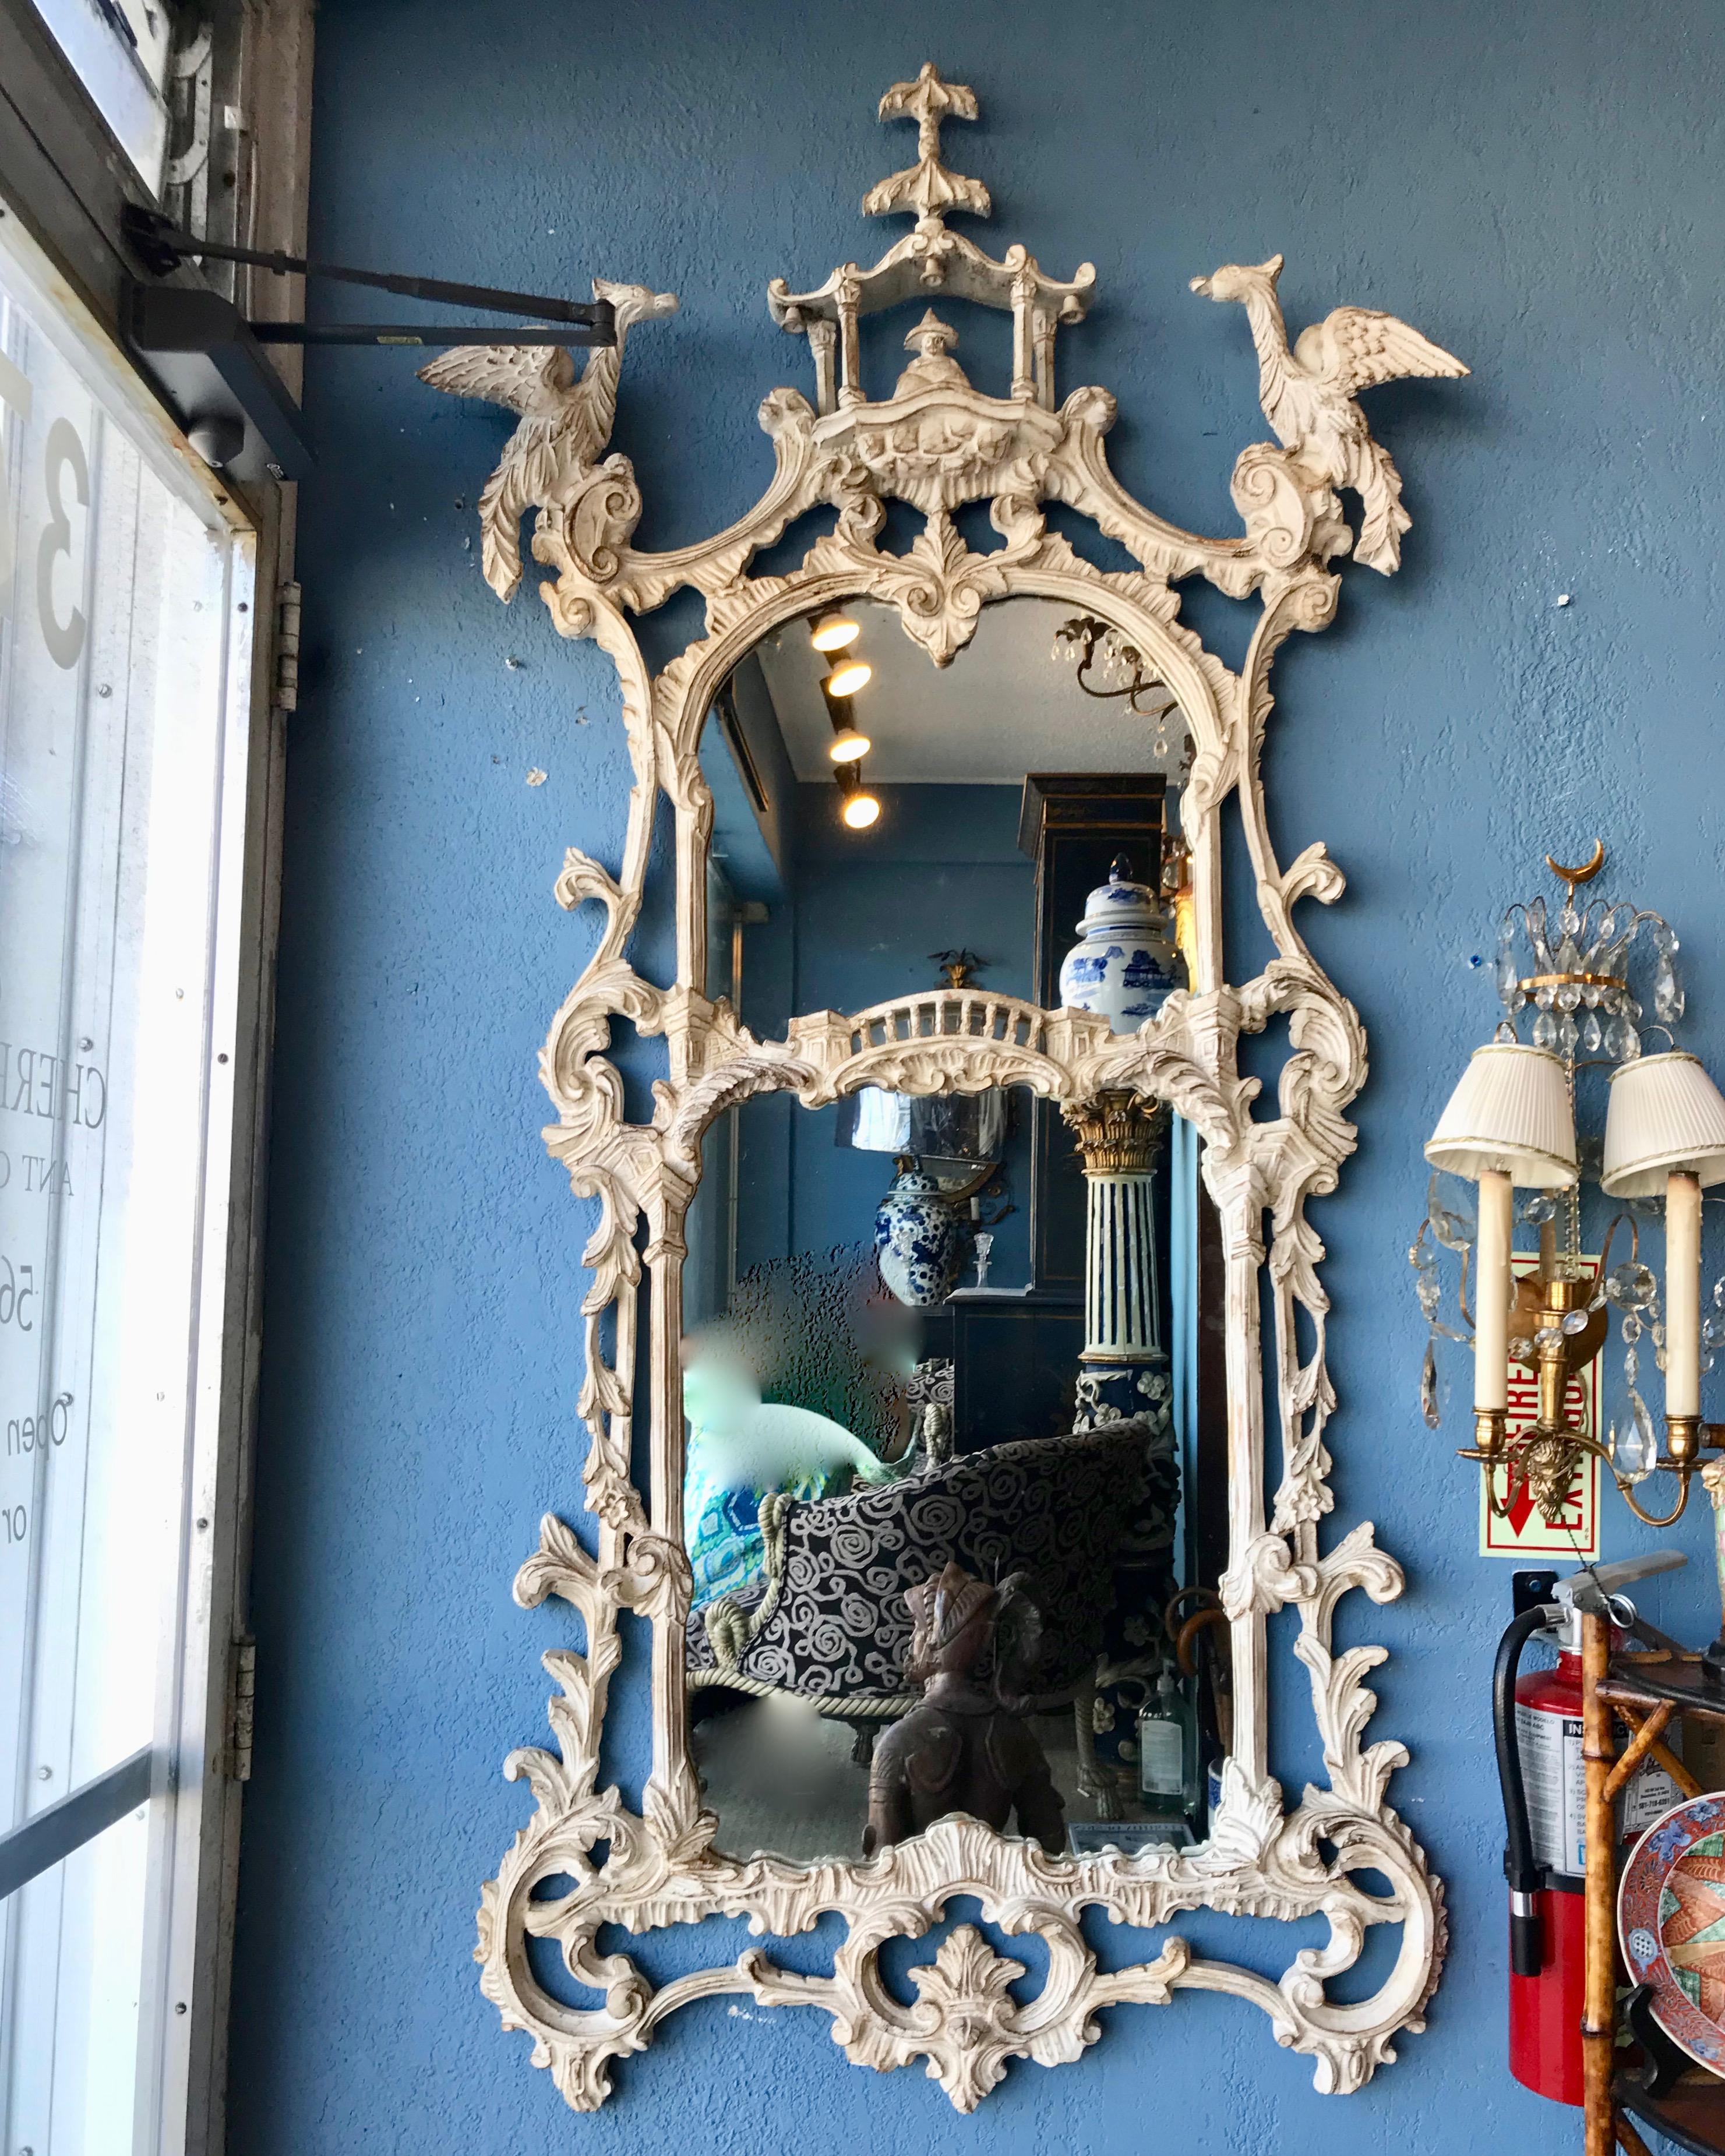 Appointed with a pagoda crown flanked  by Ho Ho birds and decorated 
with a white washed finish, the mirror is dramatic and imposing in scale.
Superior quality and workmanship.